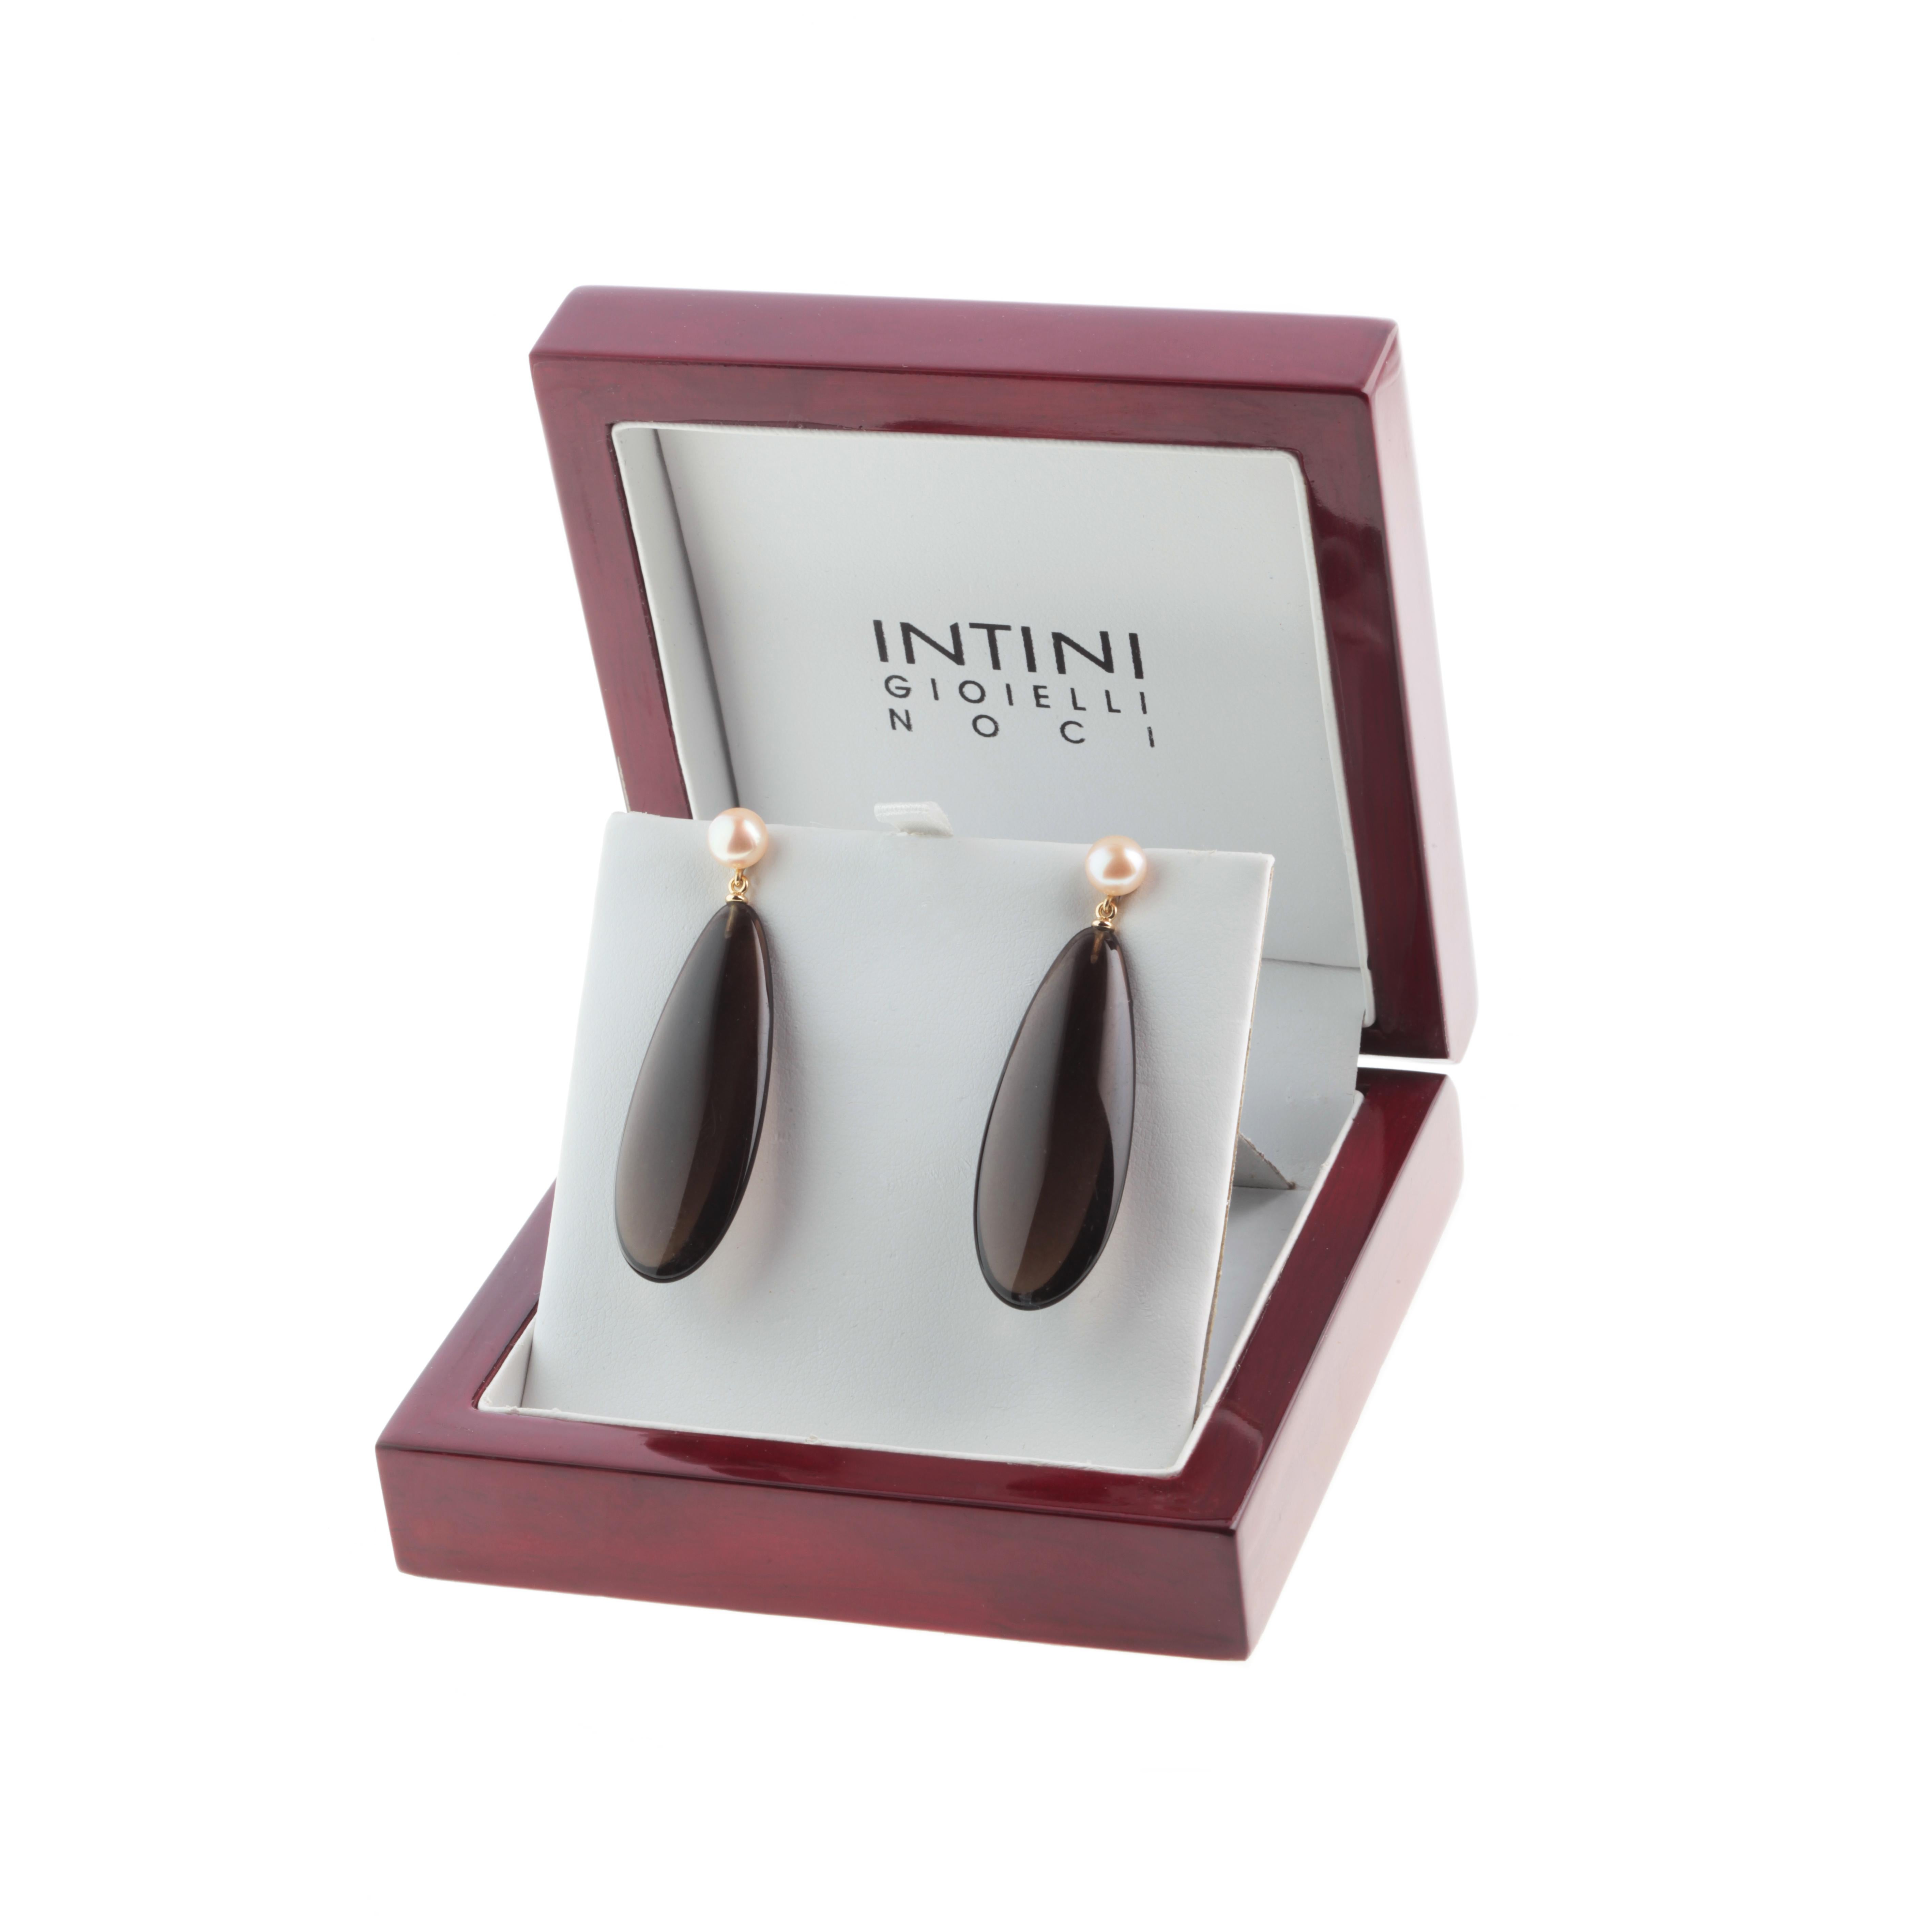 Clear and fashionable brown bold long agate crafted earrings. Holded by a 18 karat yellow gold that recreates a stylish piece of jewelry embellished with natural pearls. The perfect touch full of modernity with a tear drop design. Vintage and chic